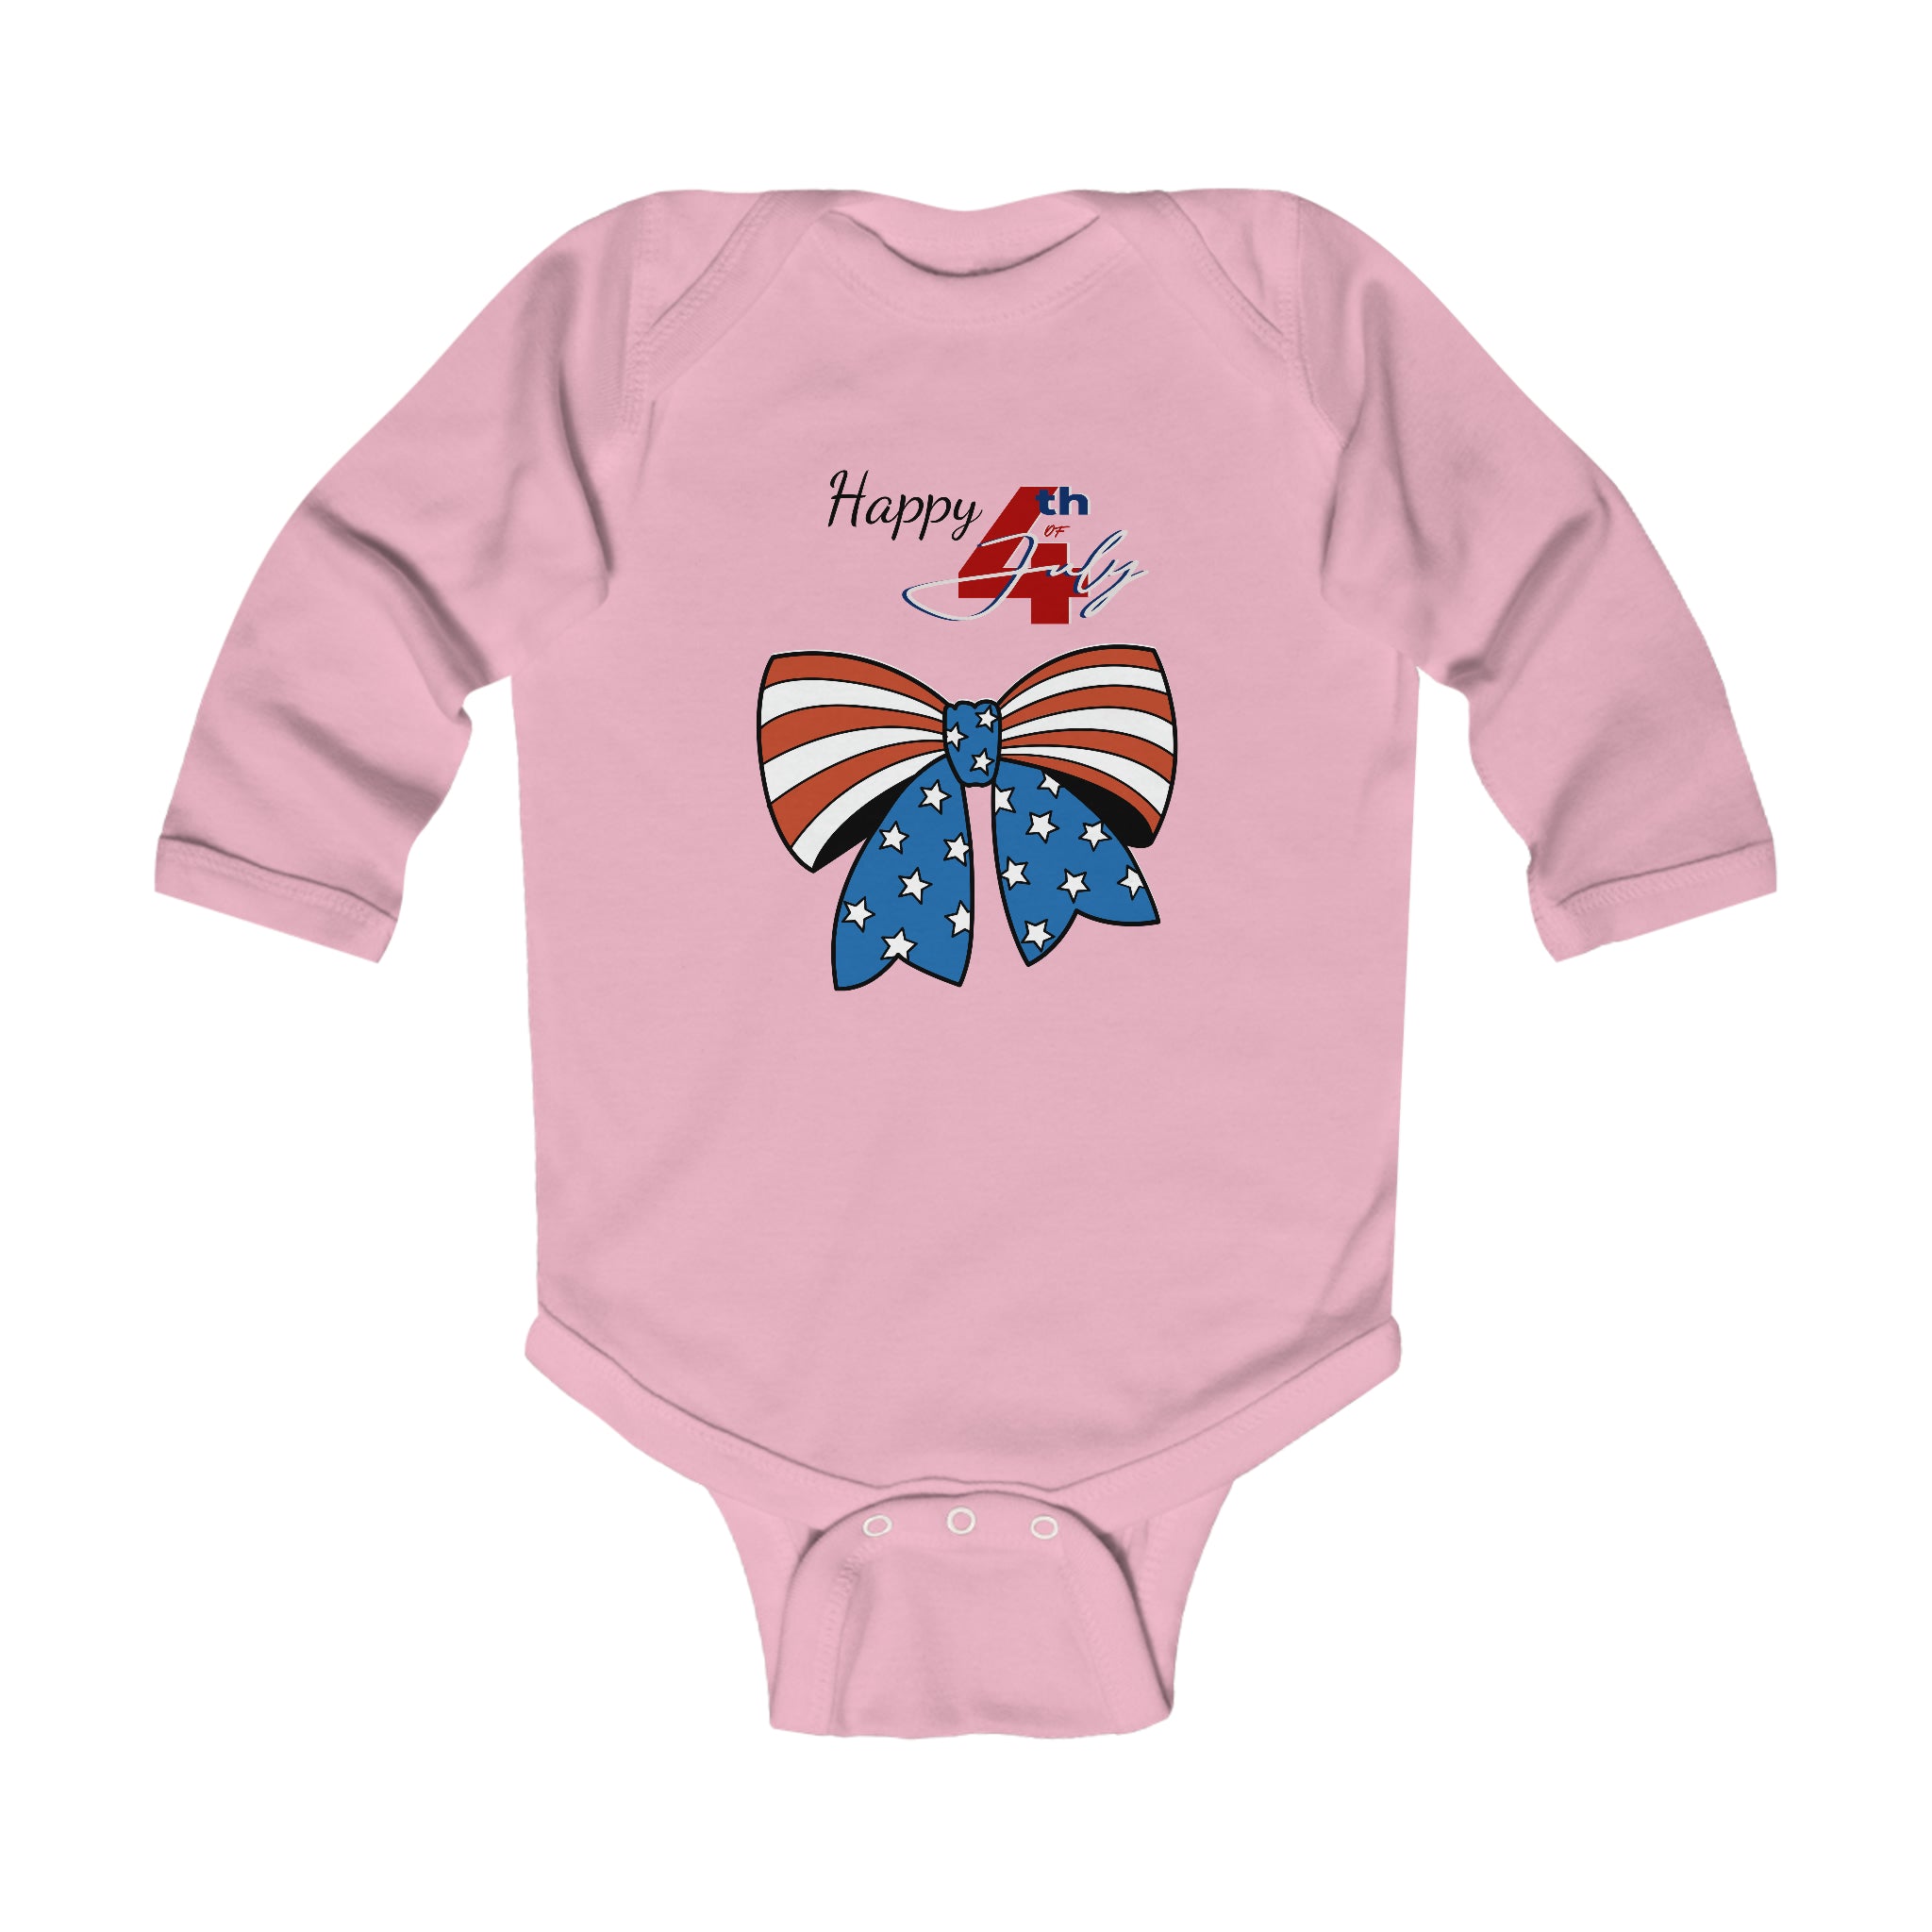 Happy 4th of July American Flag design Bow Tie Long Sleeve Baby Bodysuit